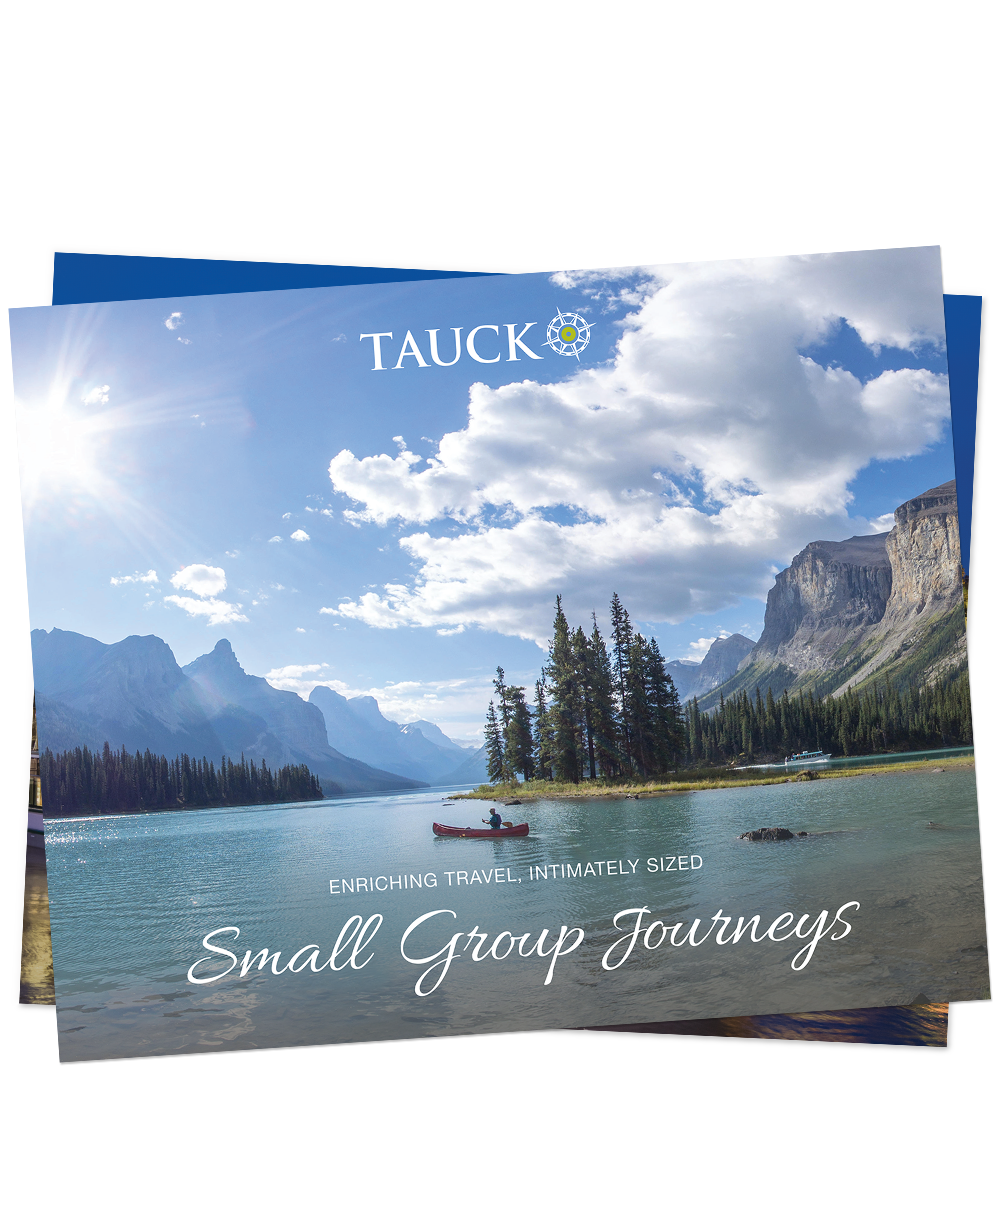 Tauck Small Group Journeys 2020